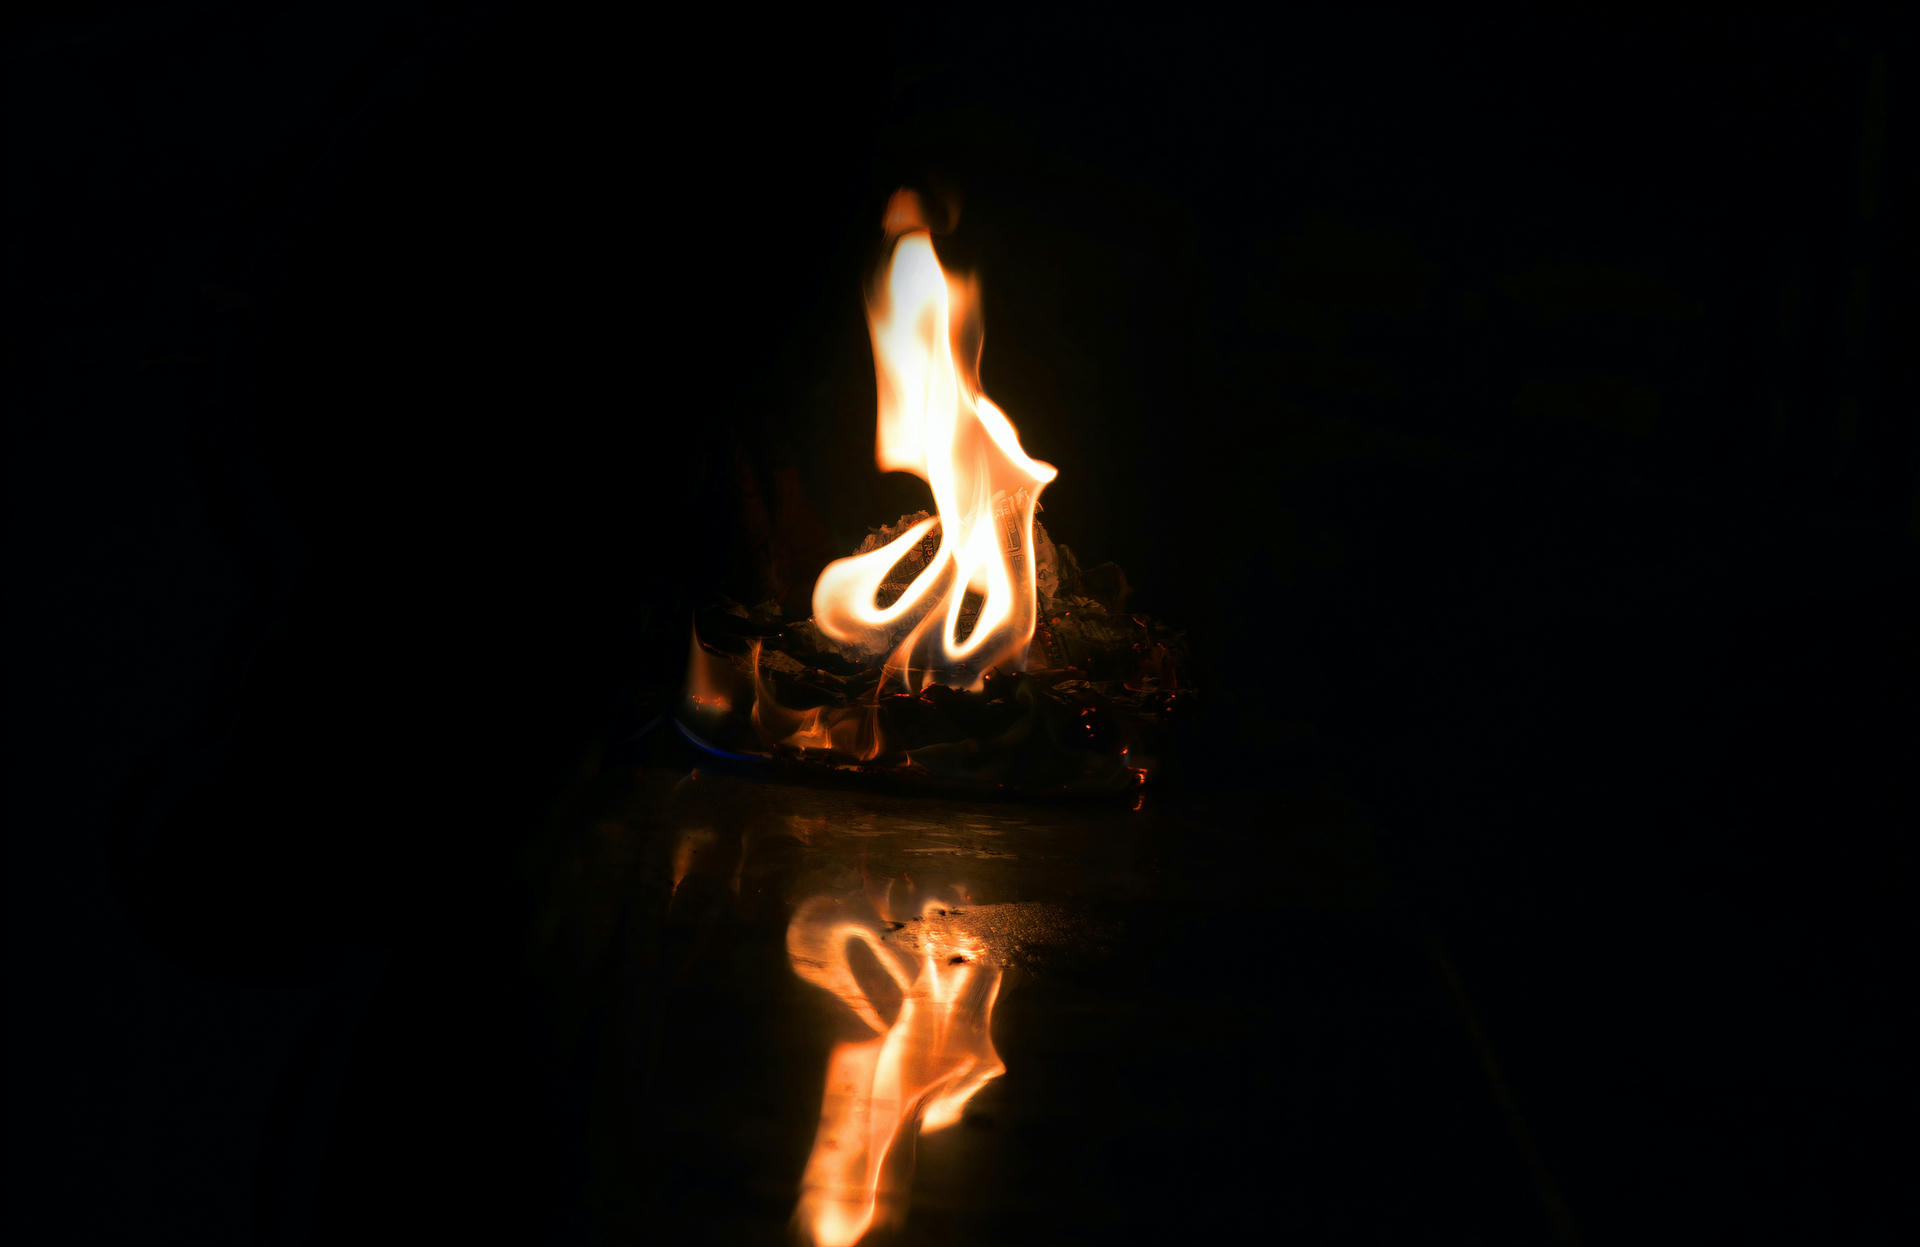 A flame with a reflection.